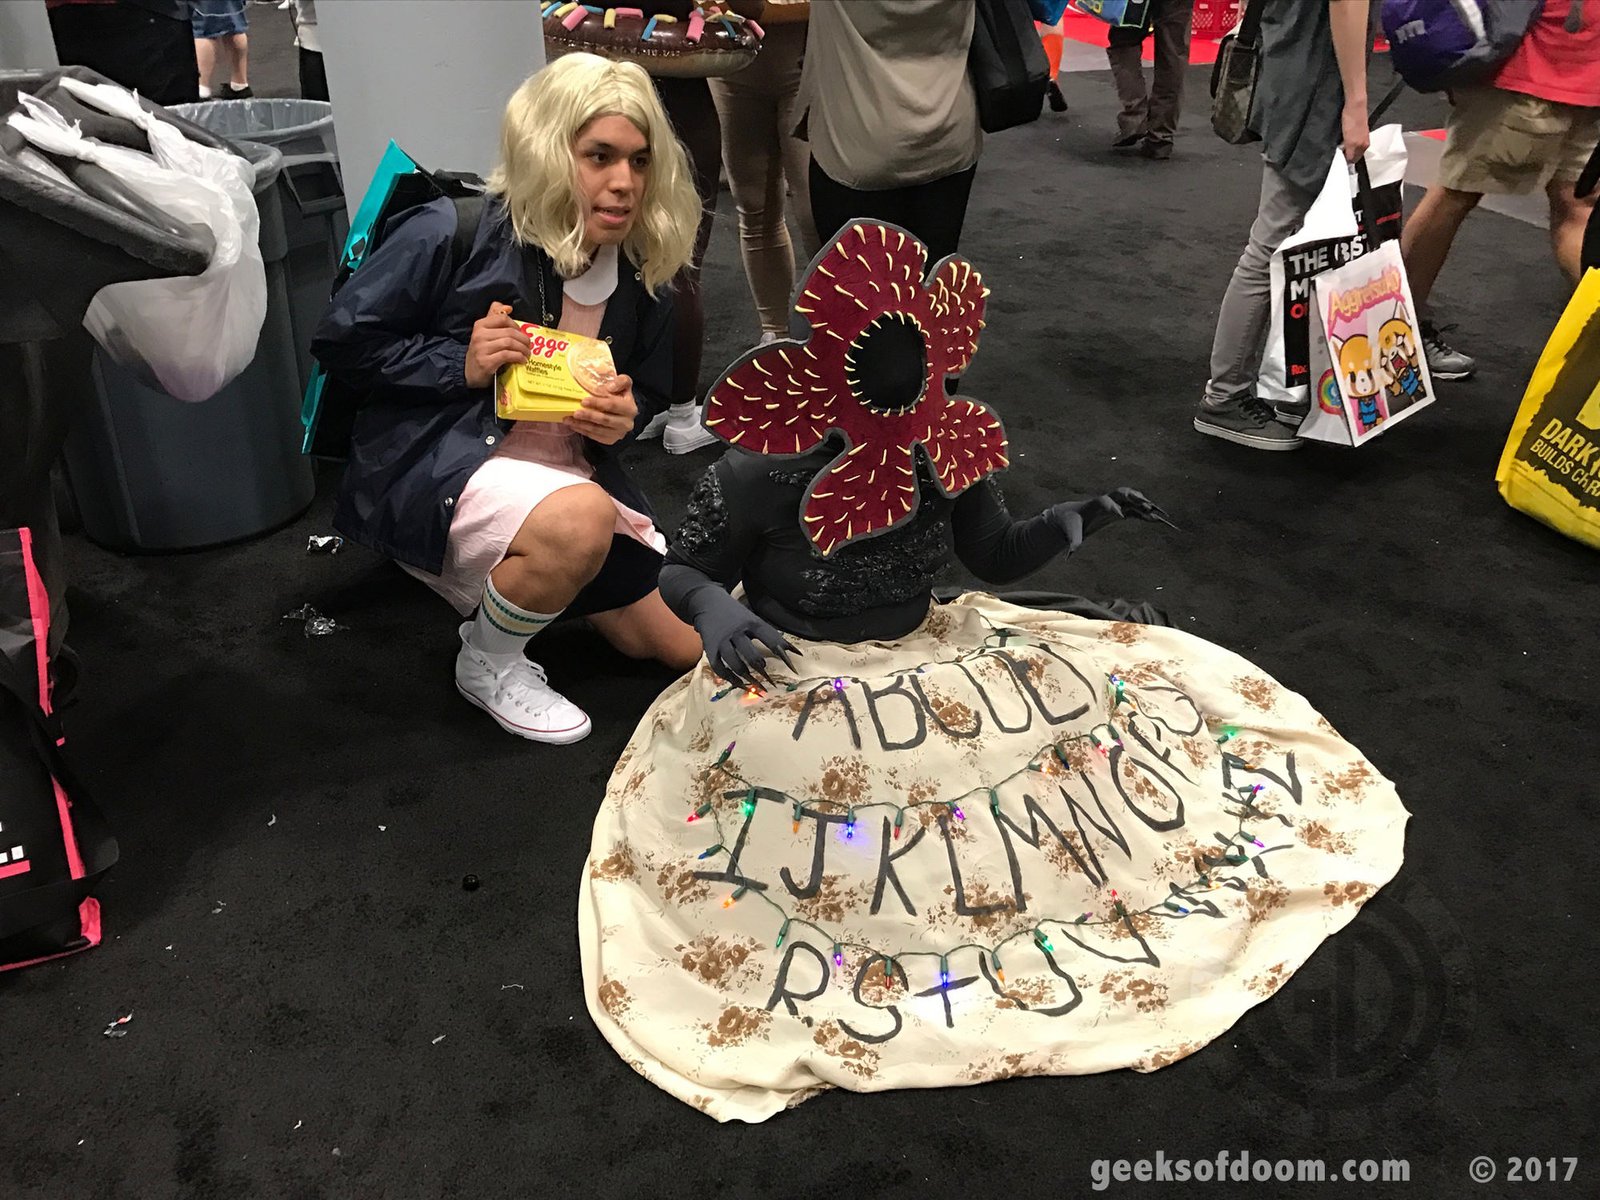 NYCC 2017 Cosplay: Eleven and Demogorgon from Stranger Things2000 x 1500